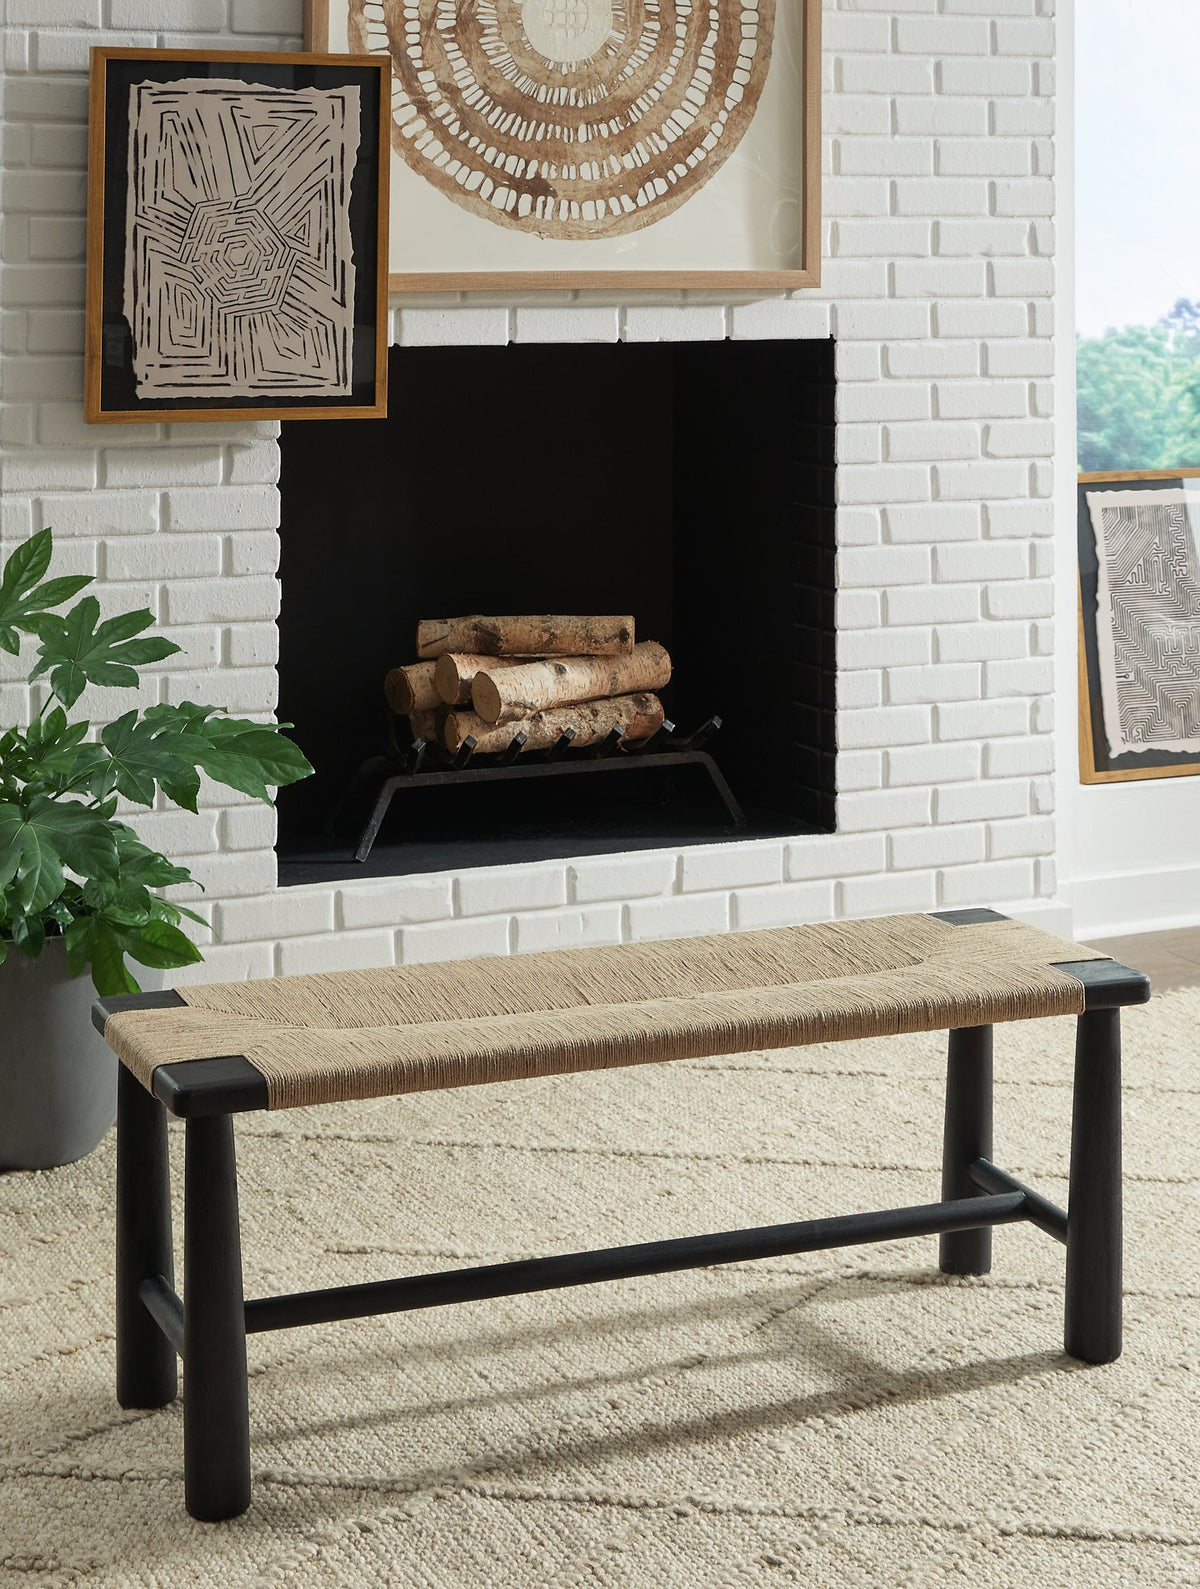 Acerman Accent Bench Acerman Accent Bench Half Price Furniture